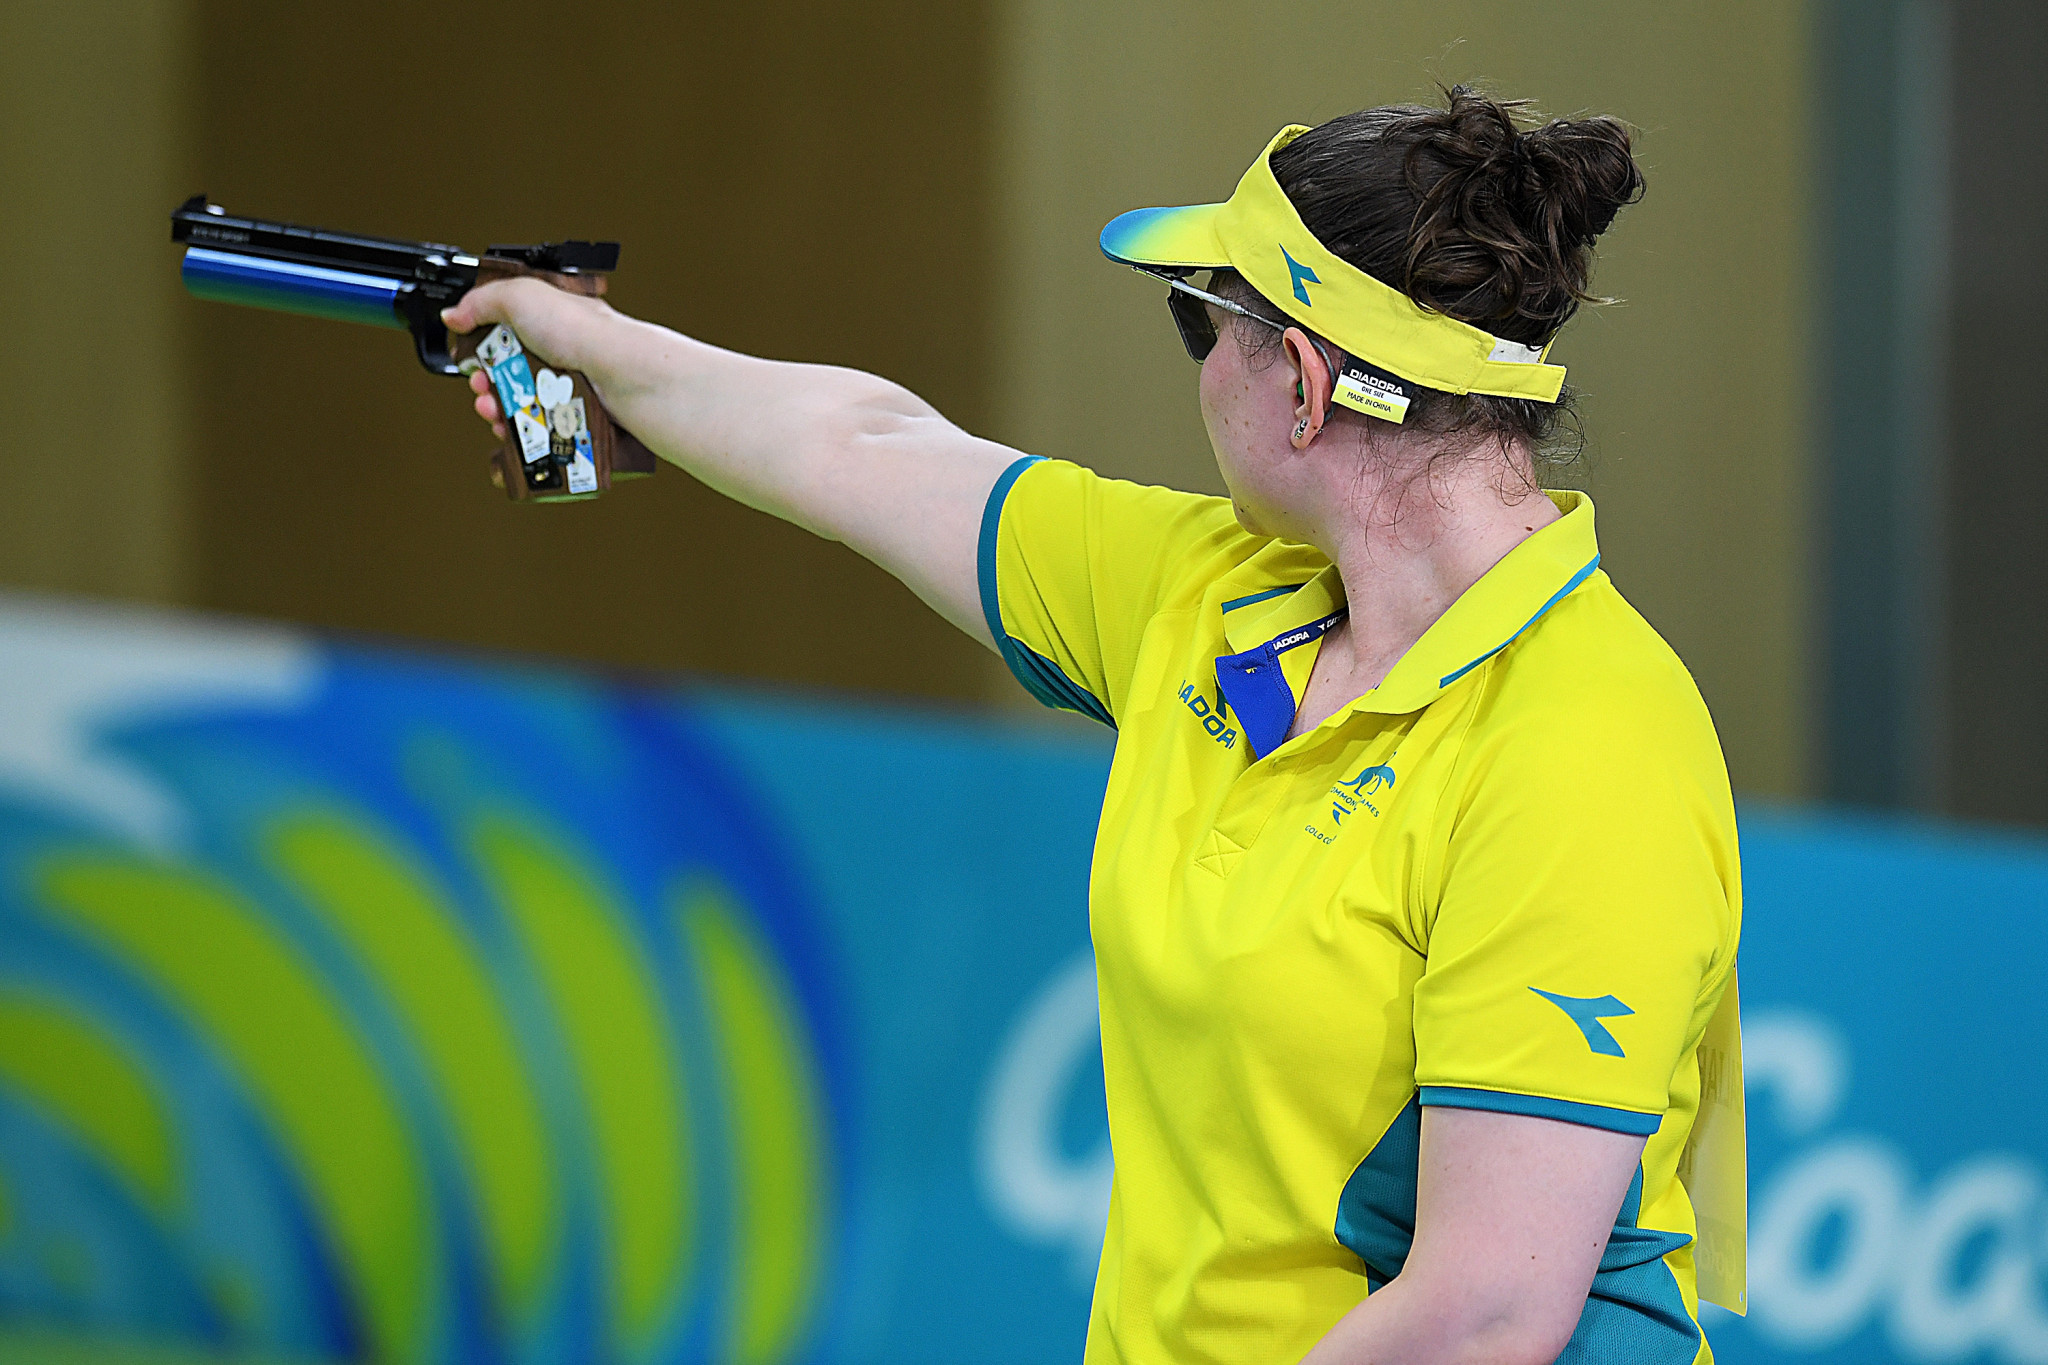 Elena Galiabovitch is among the Australian athletes looking to secure Tokyo 2020 quota positions at the Oceania Shooting Championship in Sydney ©Getty Images